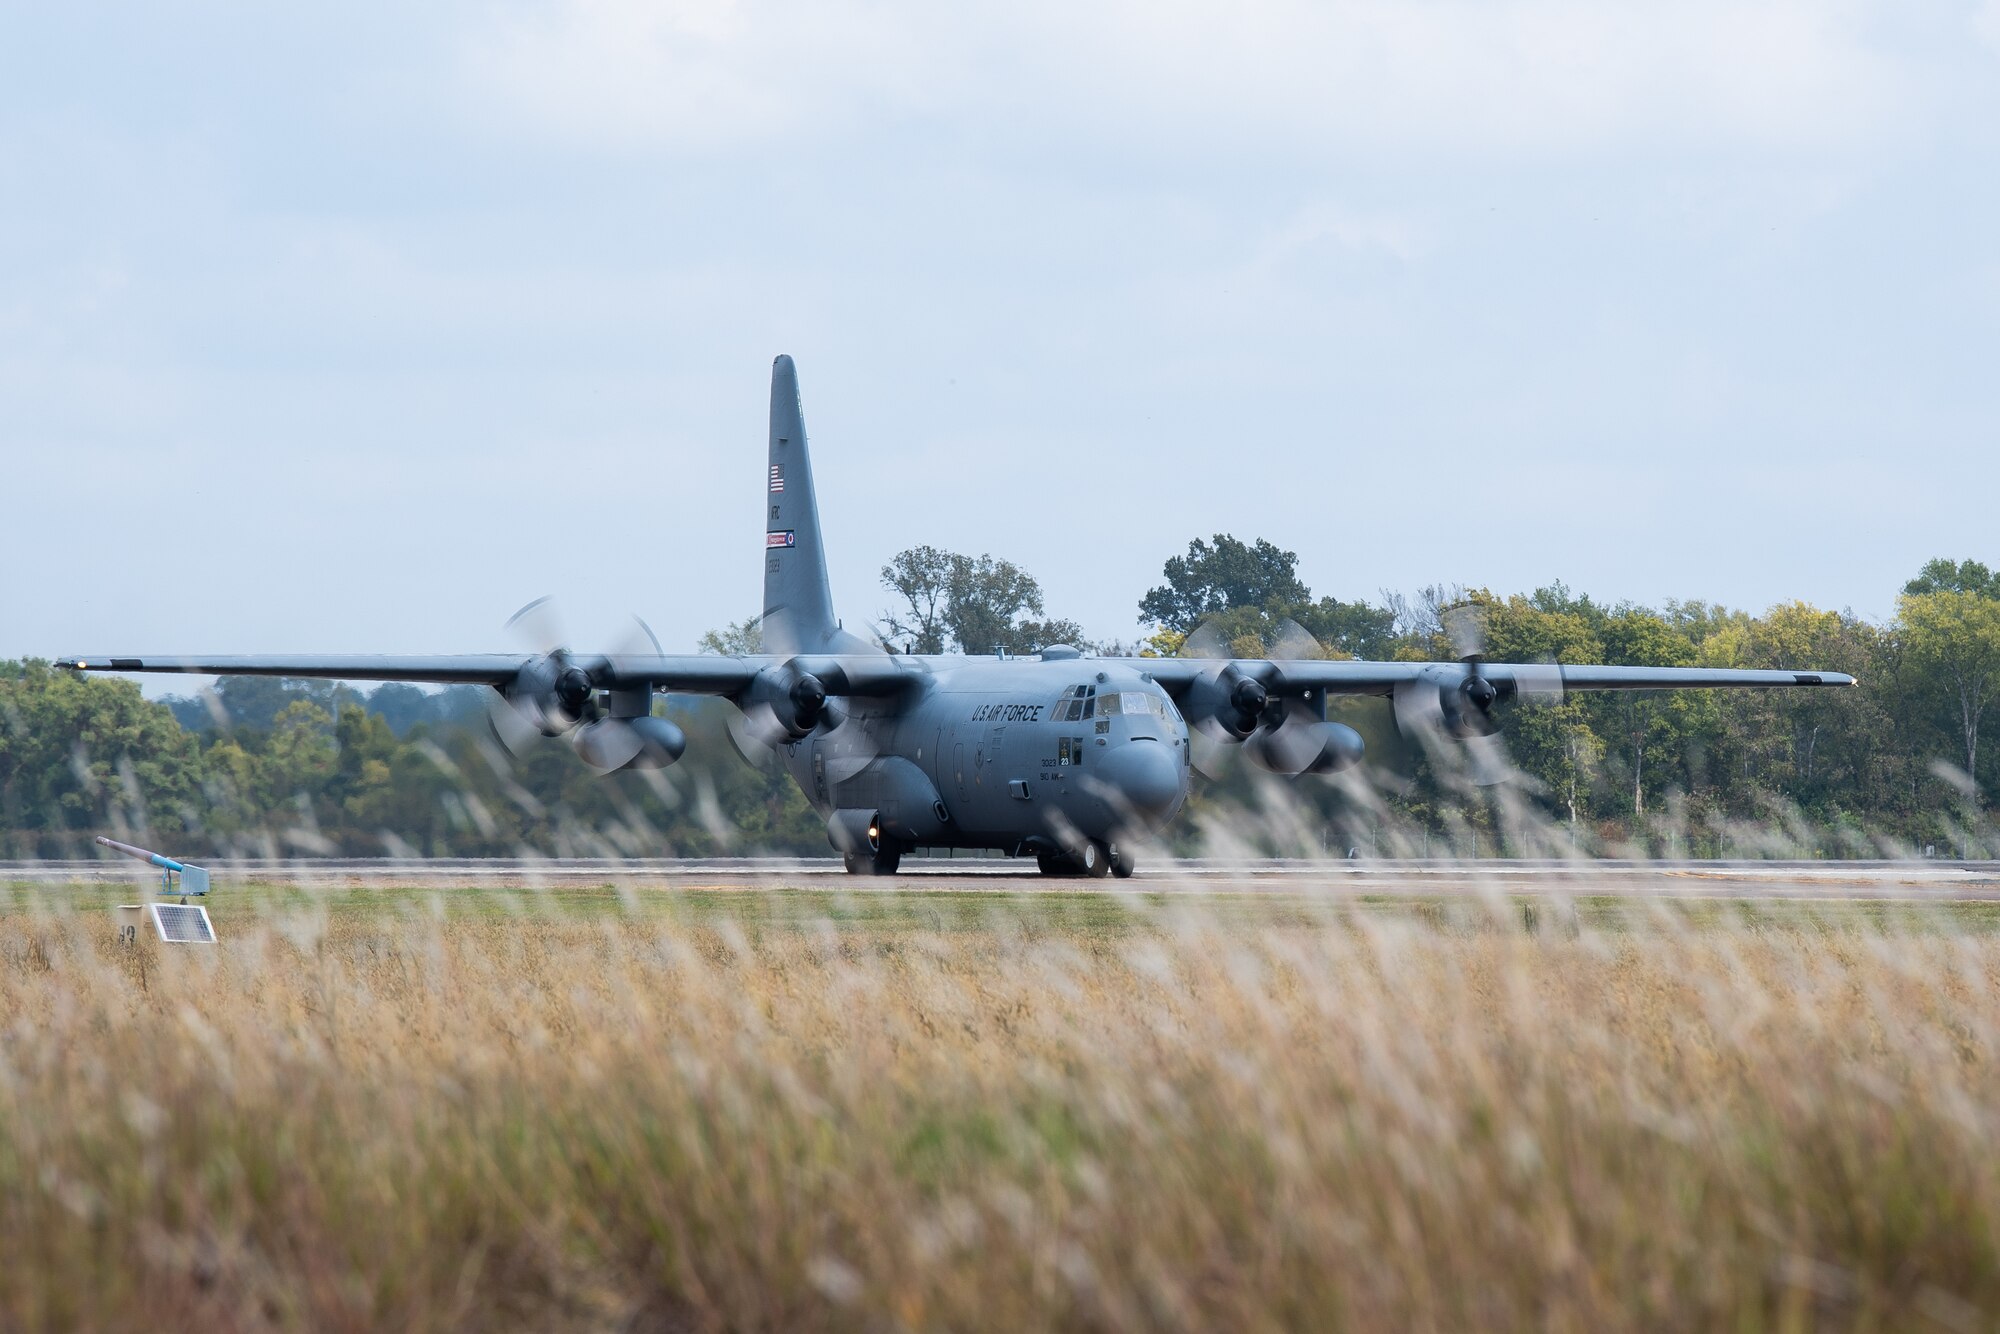 C-130s travel to Barksdale for aerial spray pest insect control efforts